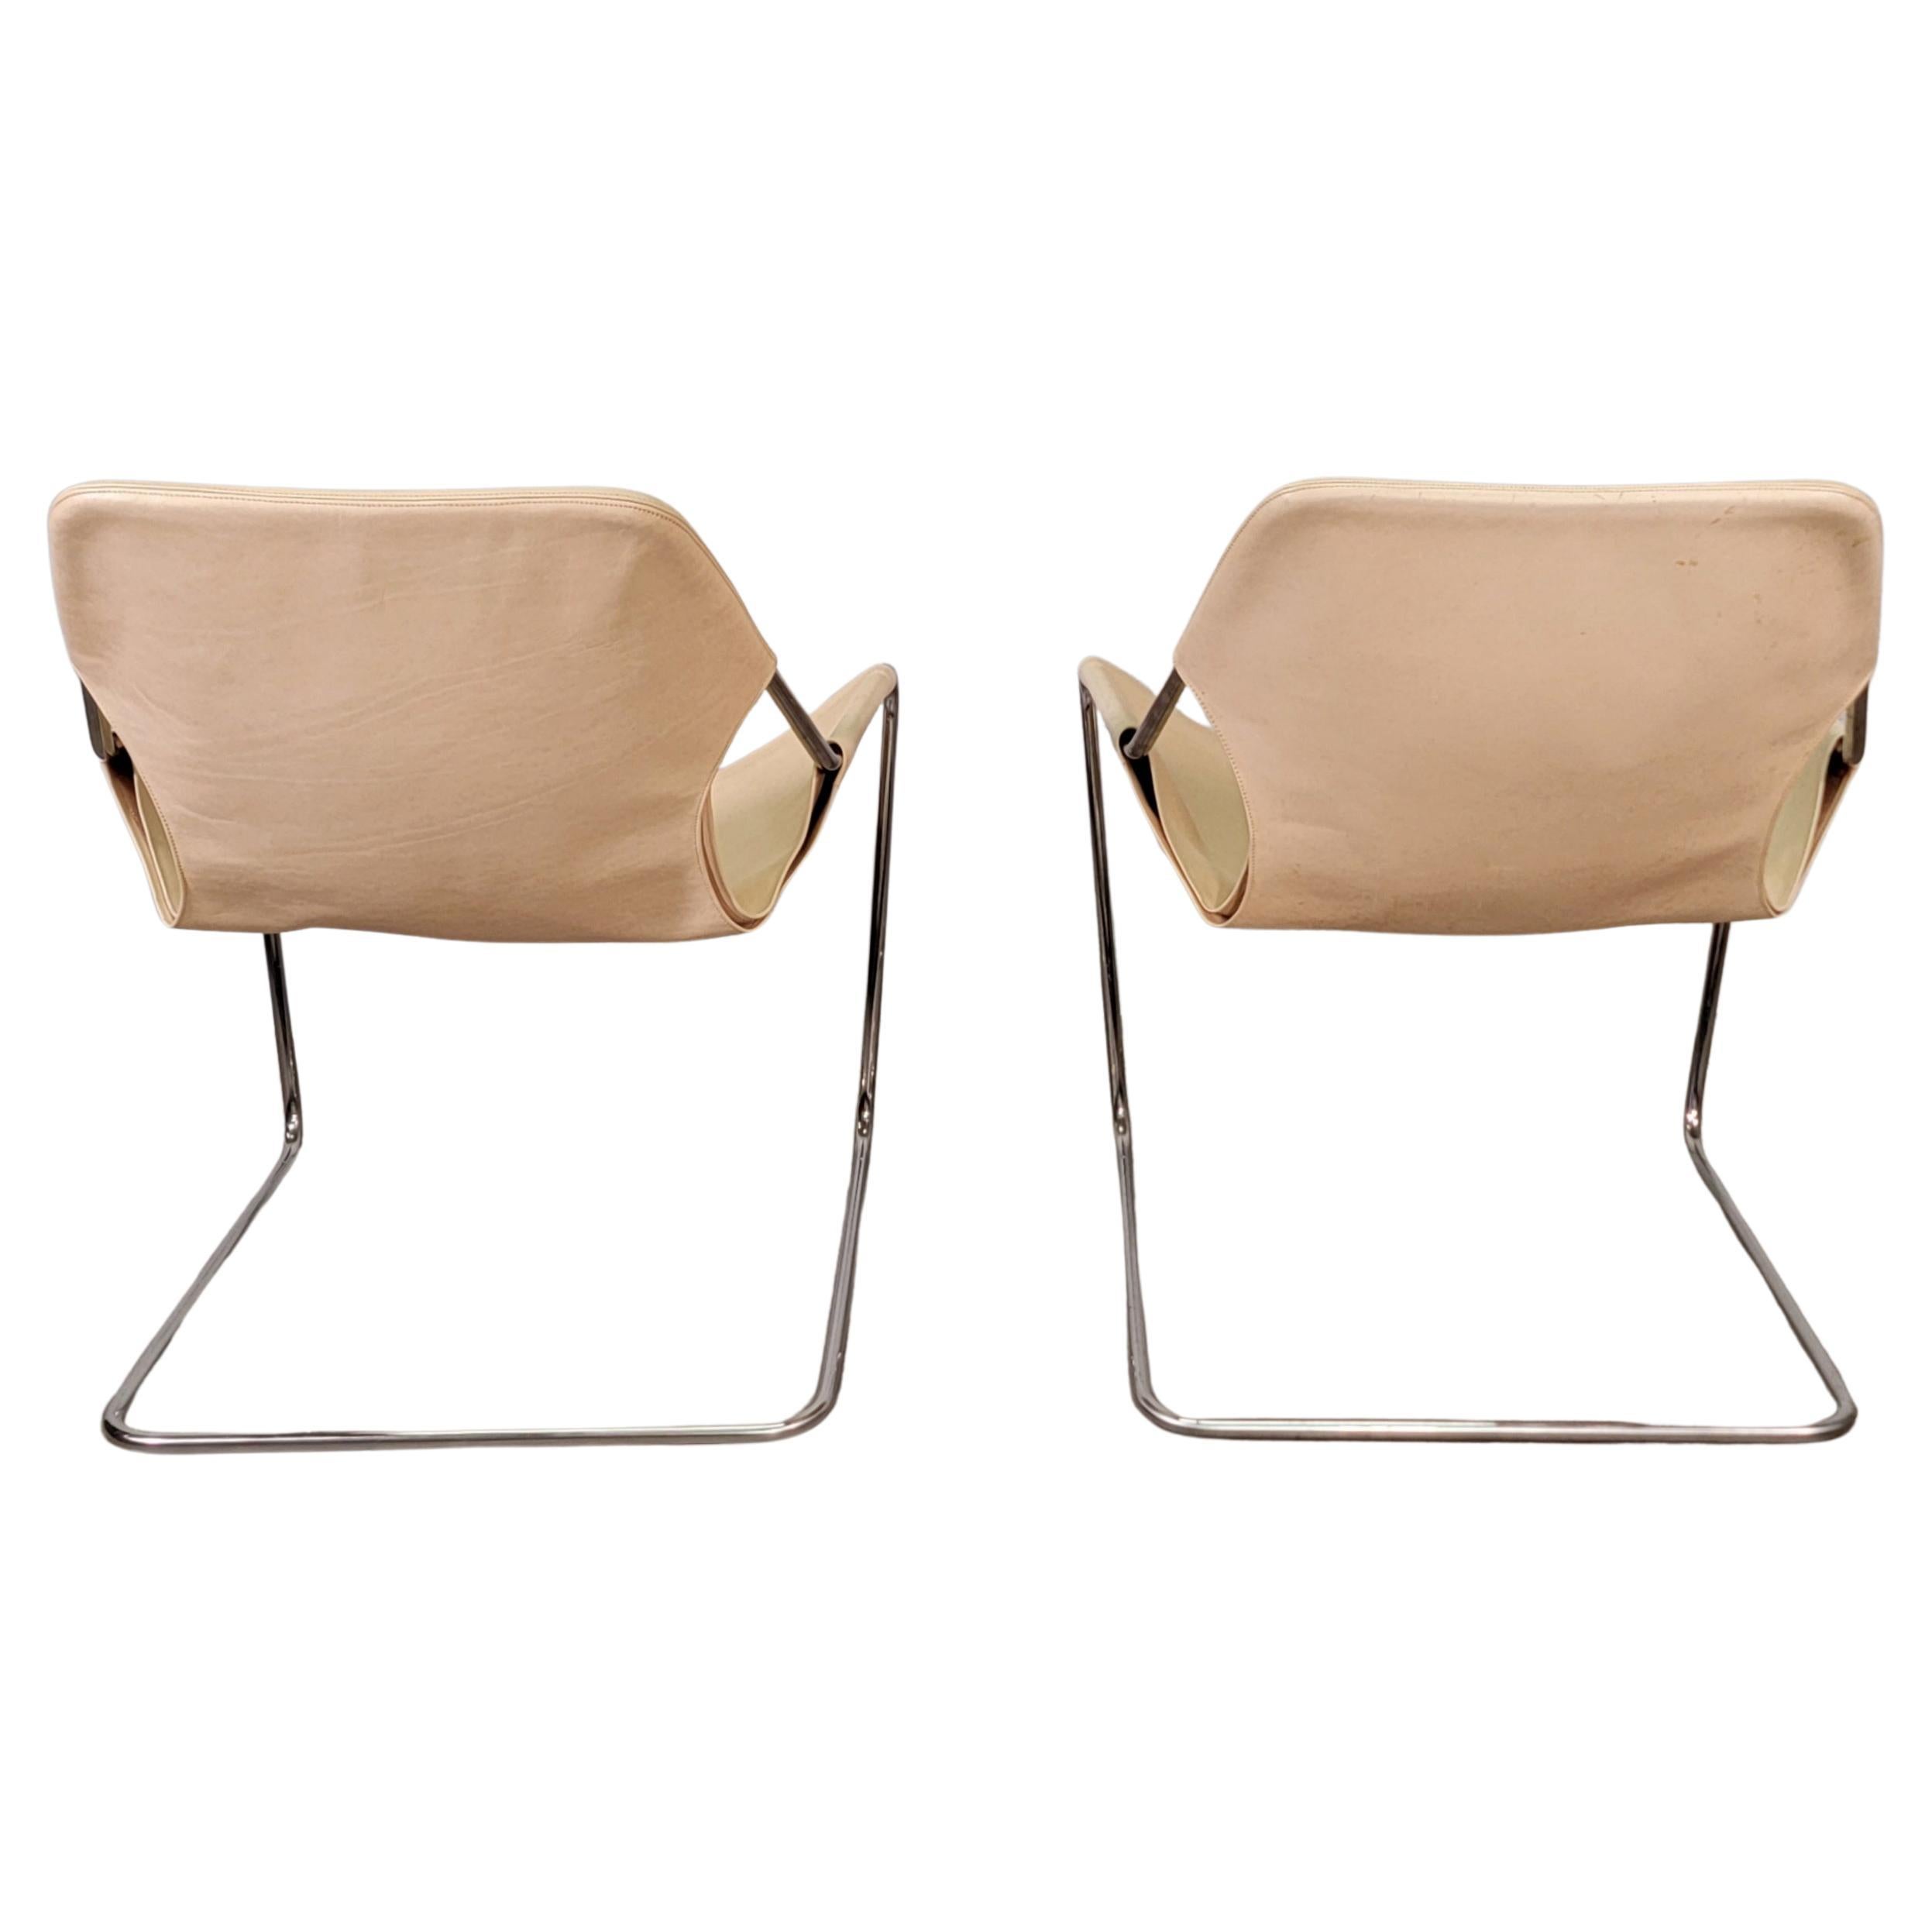 French Paulistano Natural Leather Sling Armchairs - a Pair For Sale